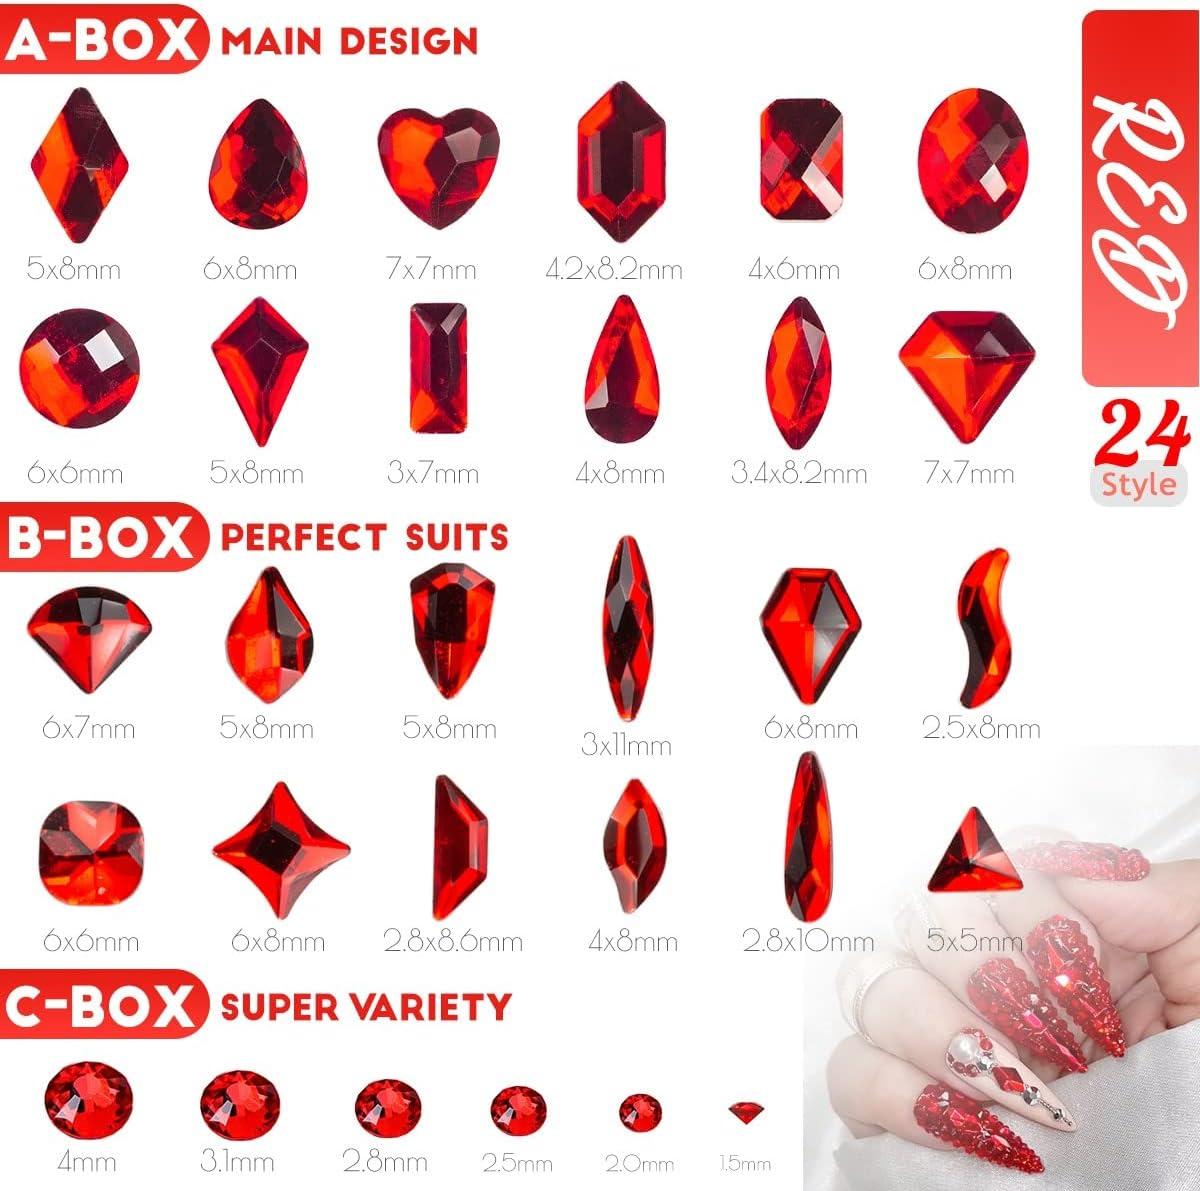  2680Pcs Red Rhinestones Nail Gems, 120pcs Big red Nails Charms  with Bling Flatback Round Beads, Light red Clear Diamond Stones Jewelry  Supplies for DIY Face Eyes Makeup Crafts Decoration : Beauty